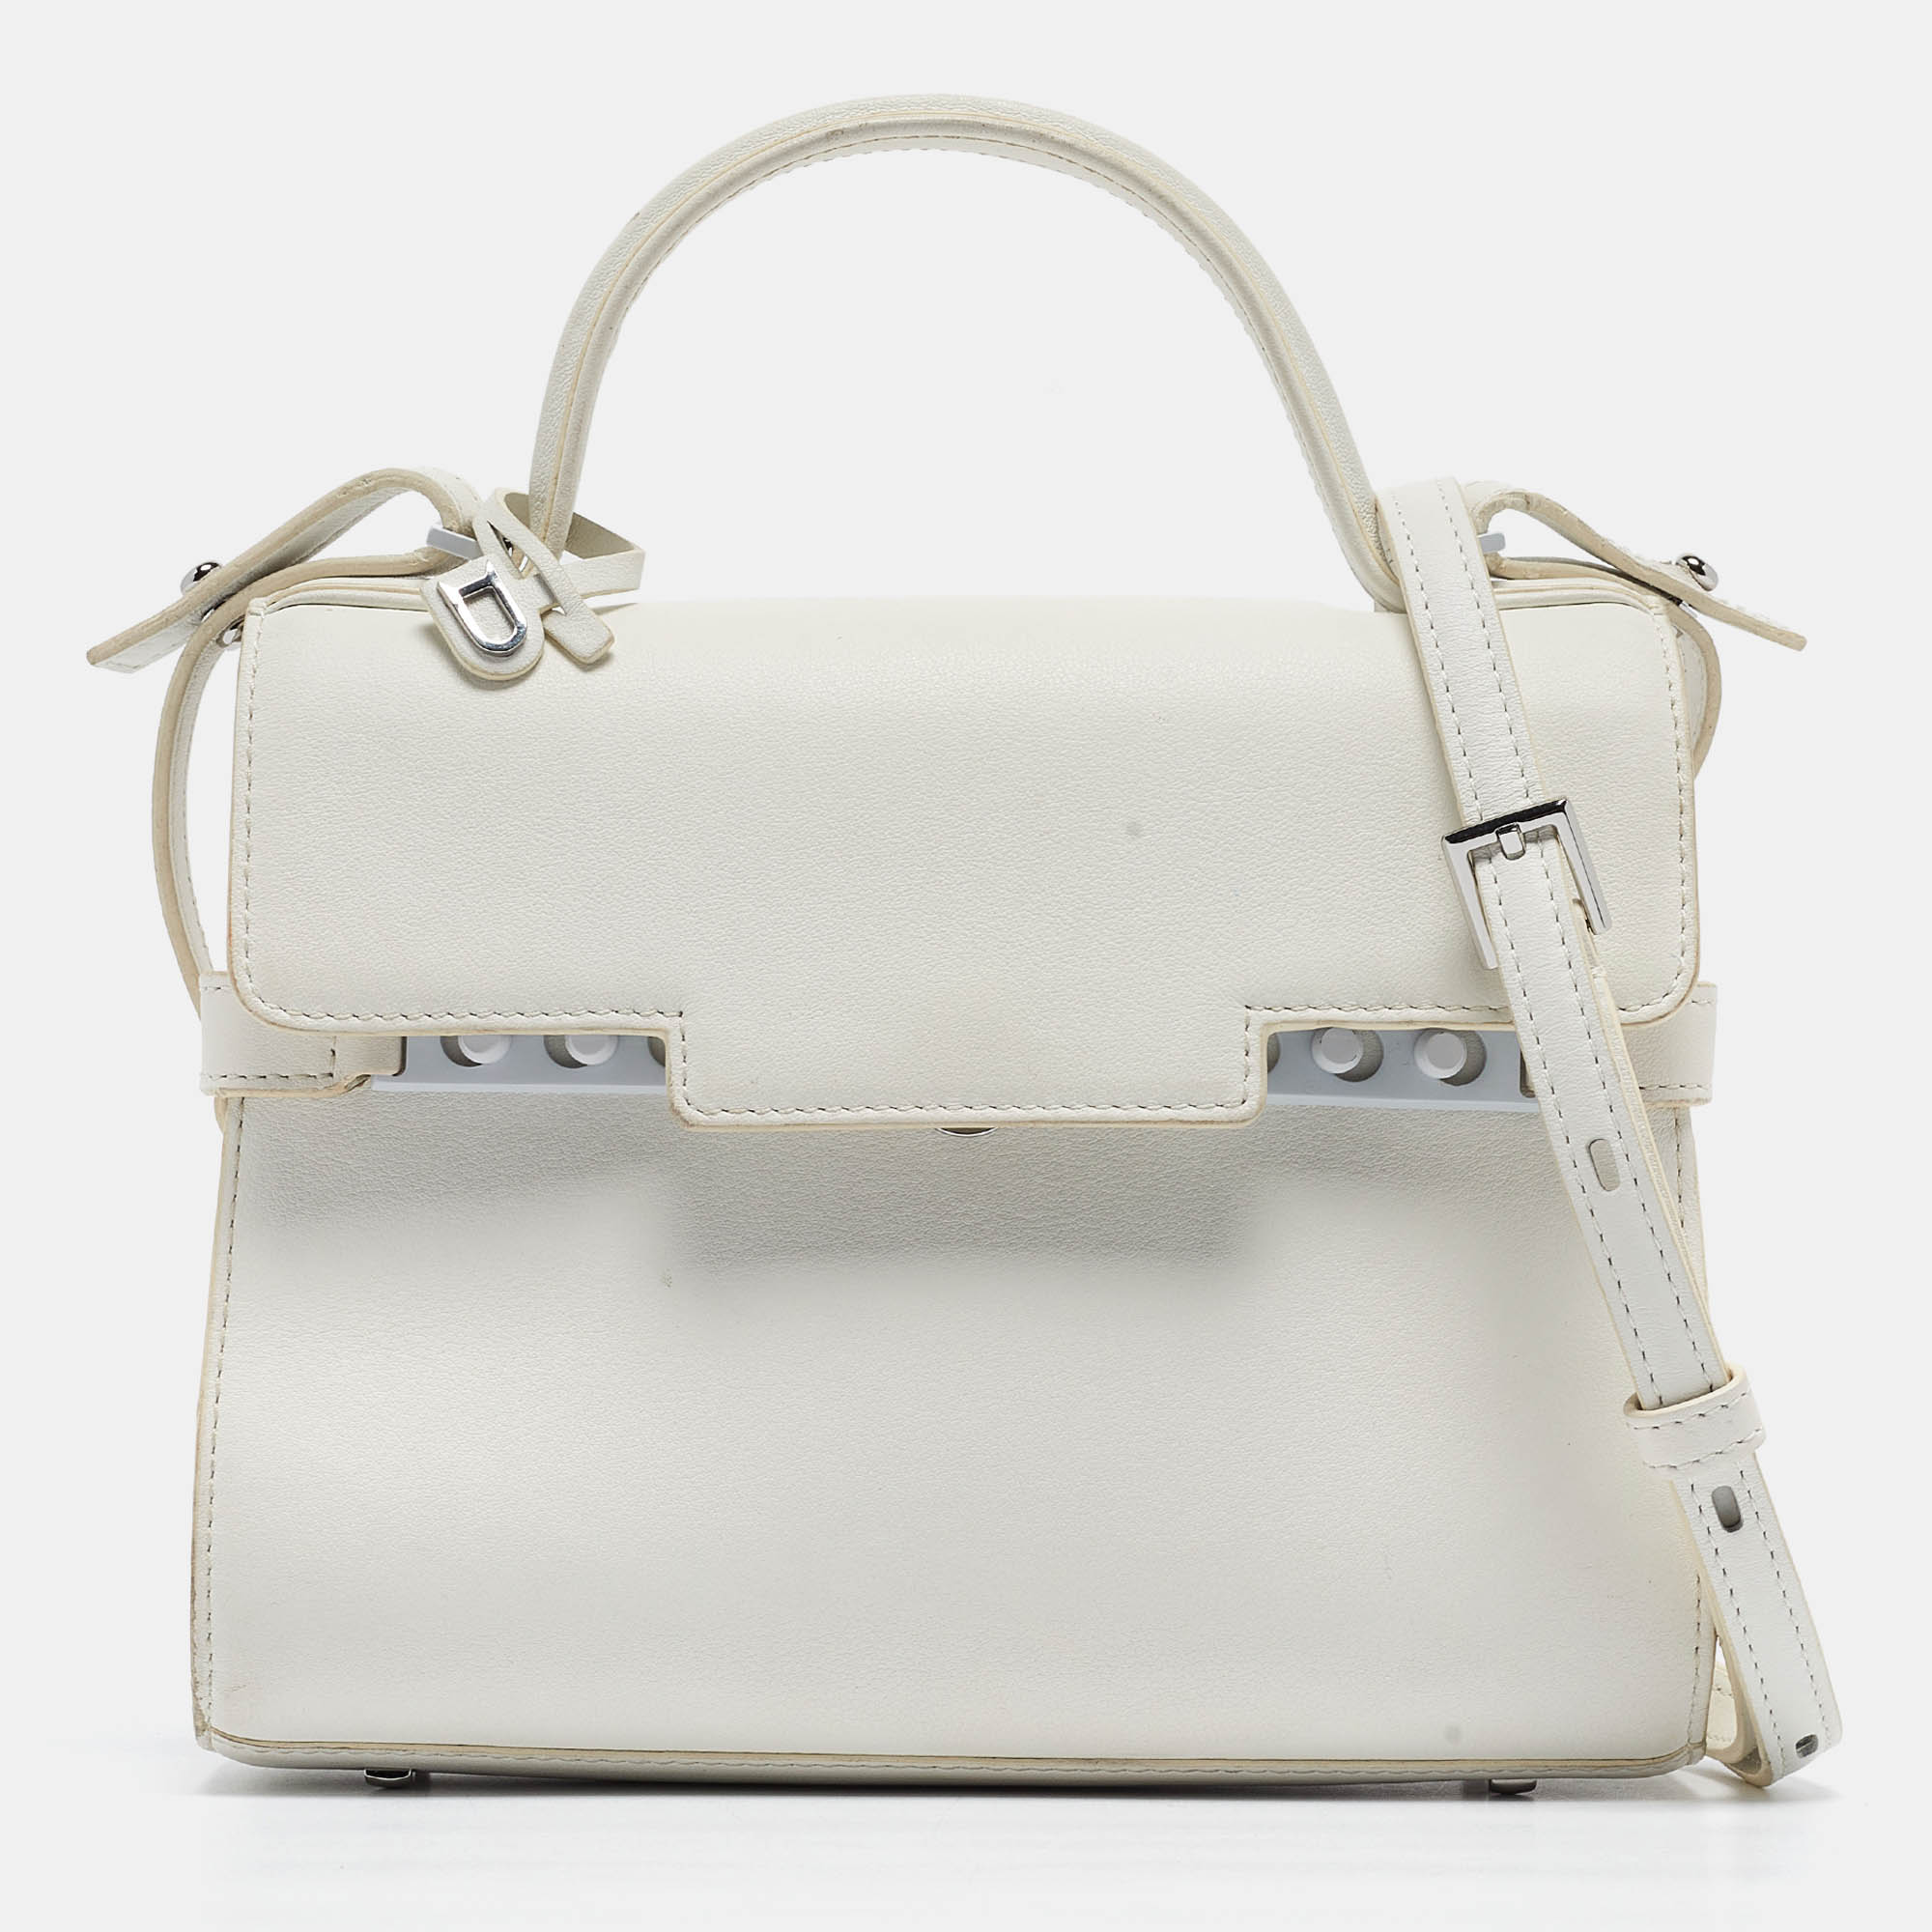 Delvaux white leather tempete pm top handle bag